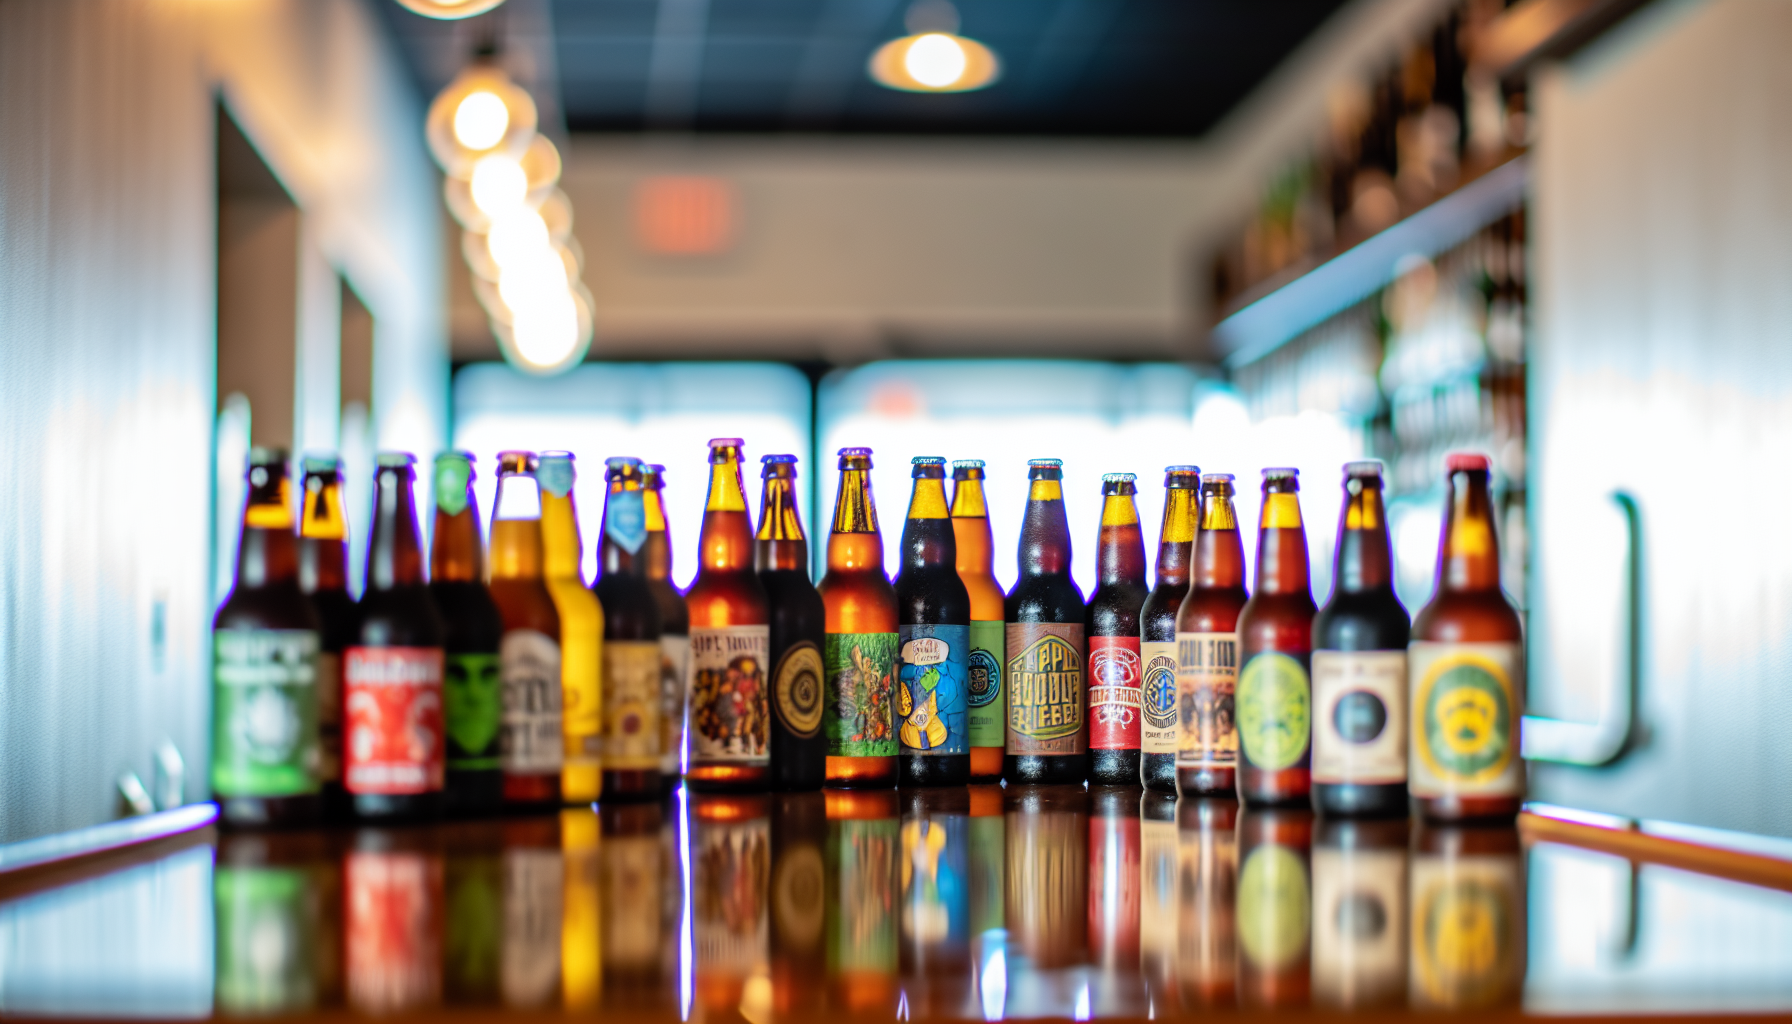 A variety of craft beers on display at the best breweries in Fort Lauderdale